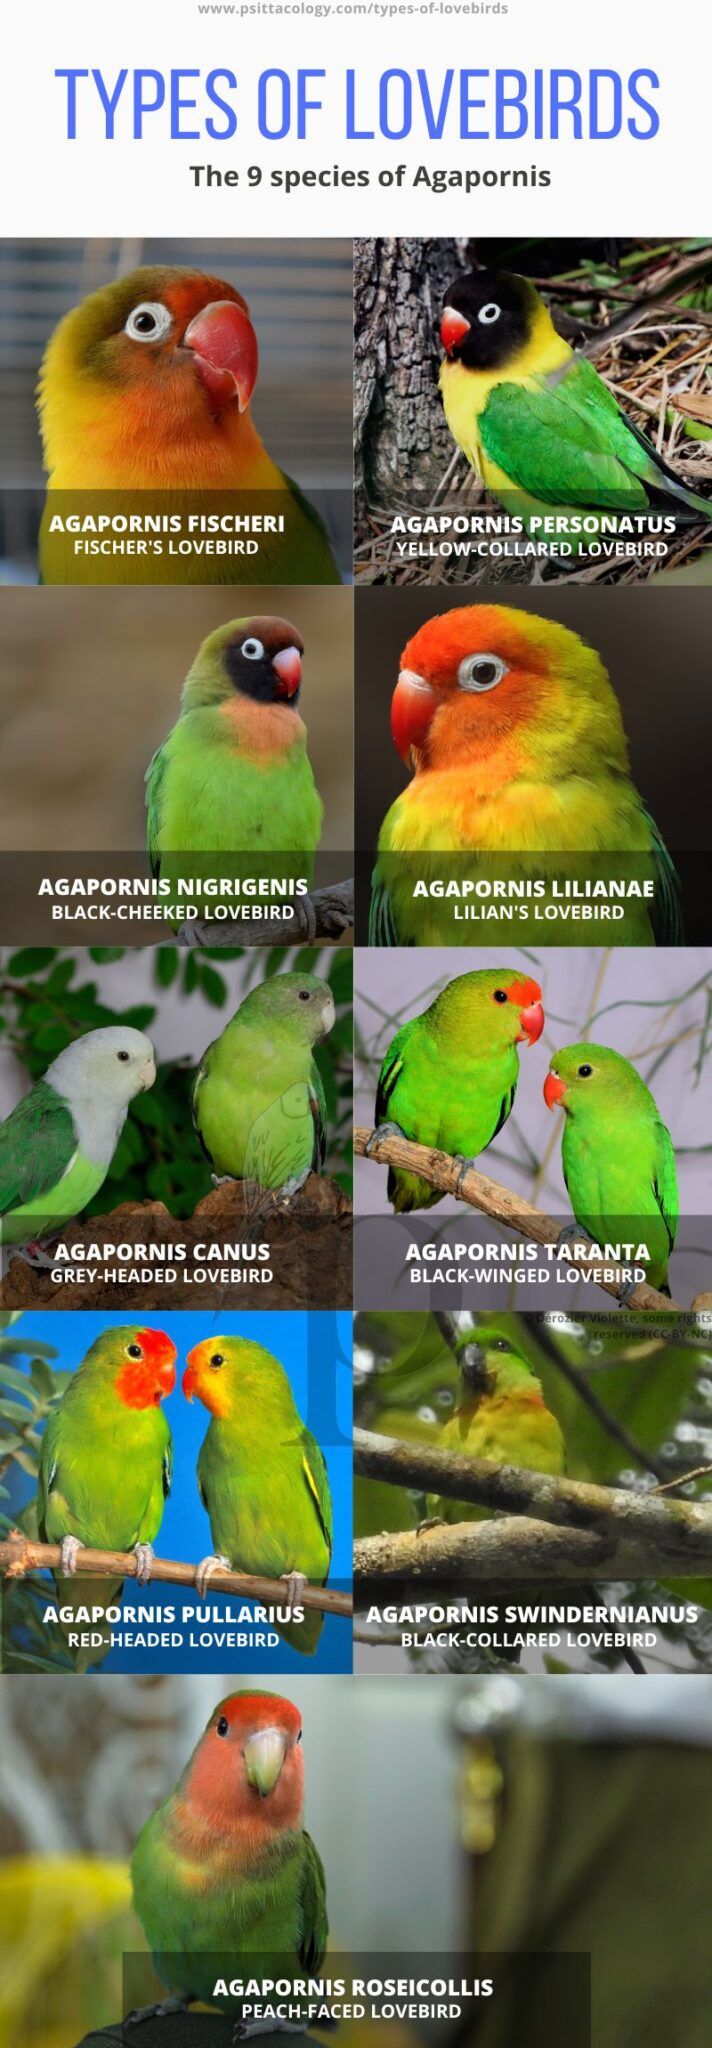 Chart showing 9 different types of lovebirds (Agapornis).